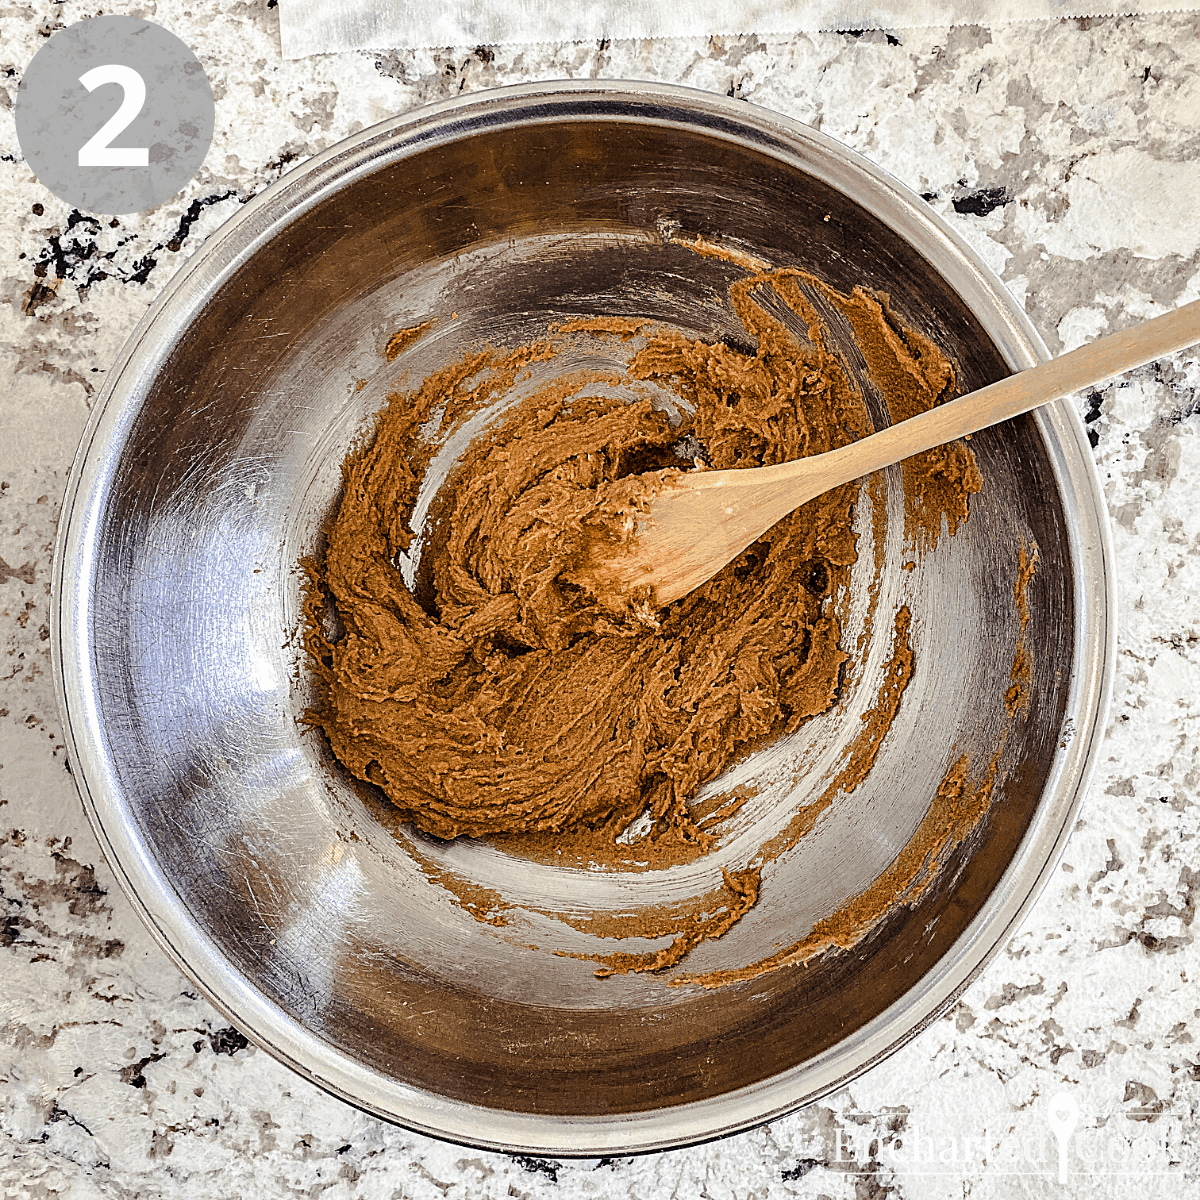 A large bowl contains a beaten mixture of dark brown sugar, butter, and other ingredients.